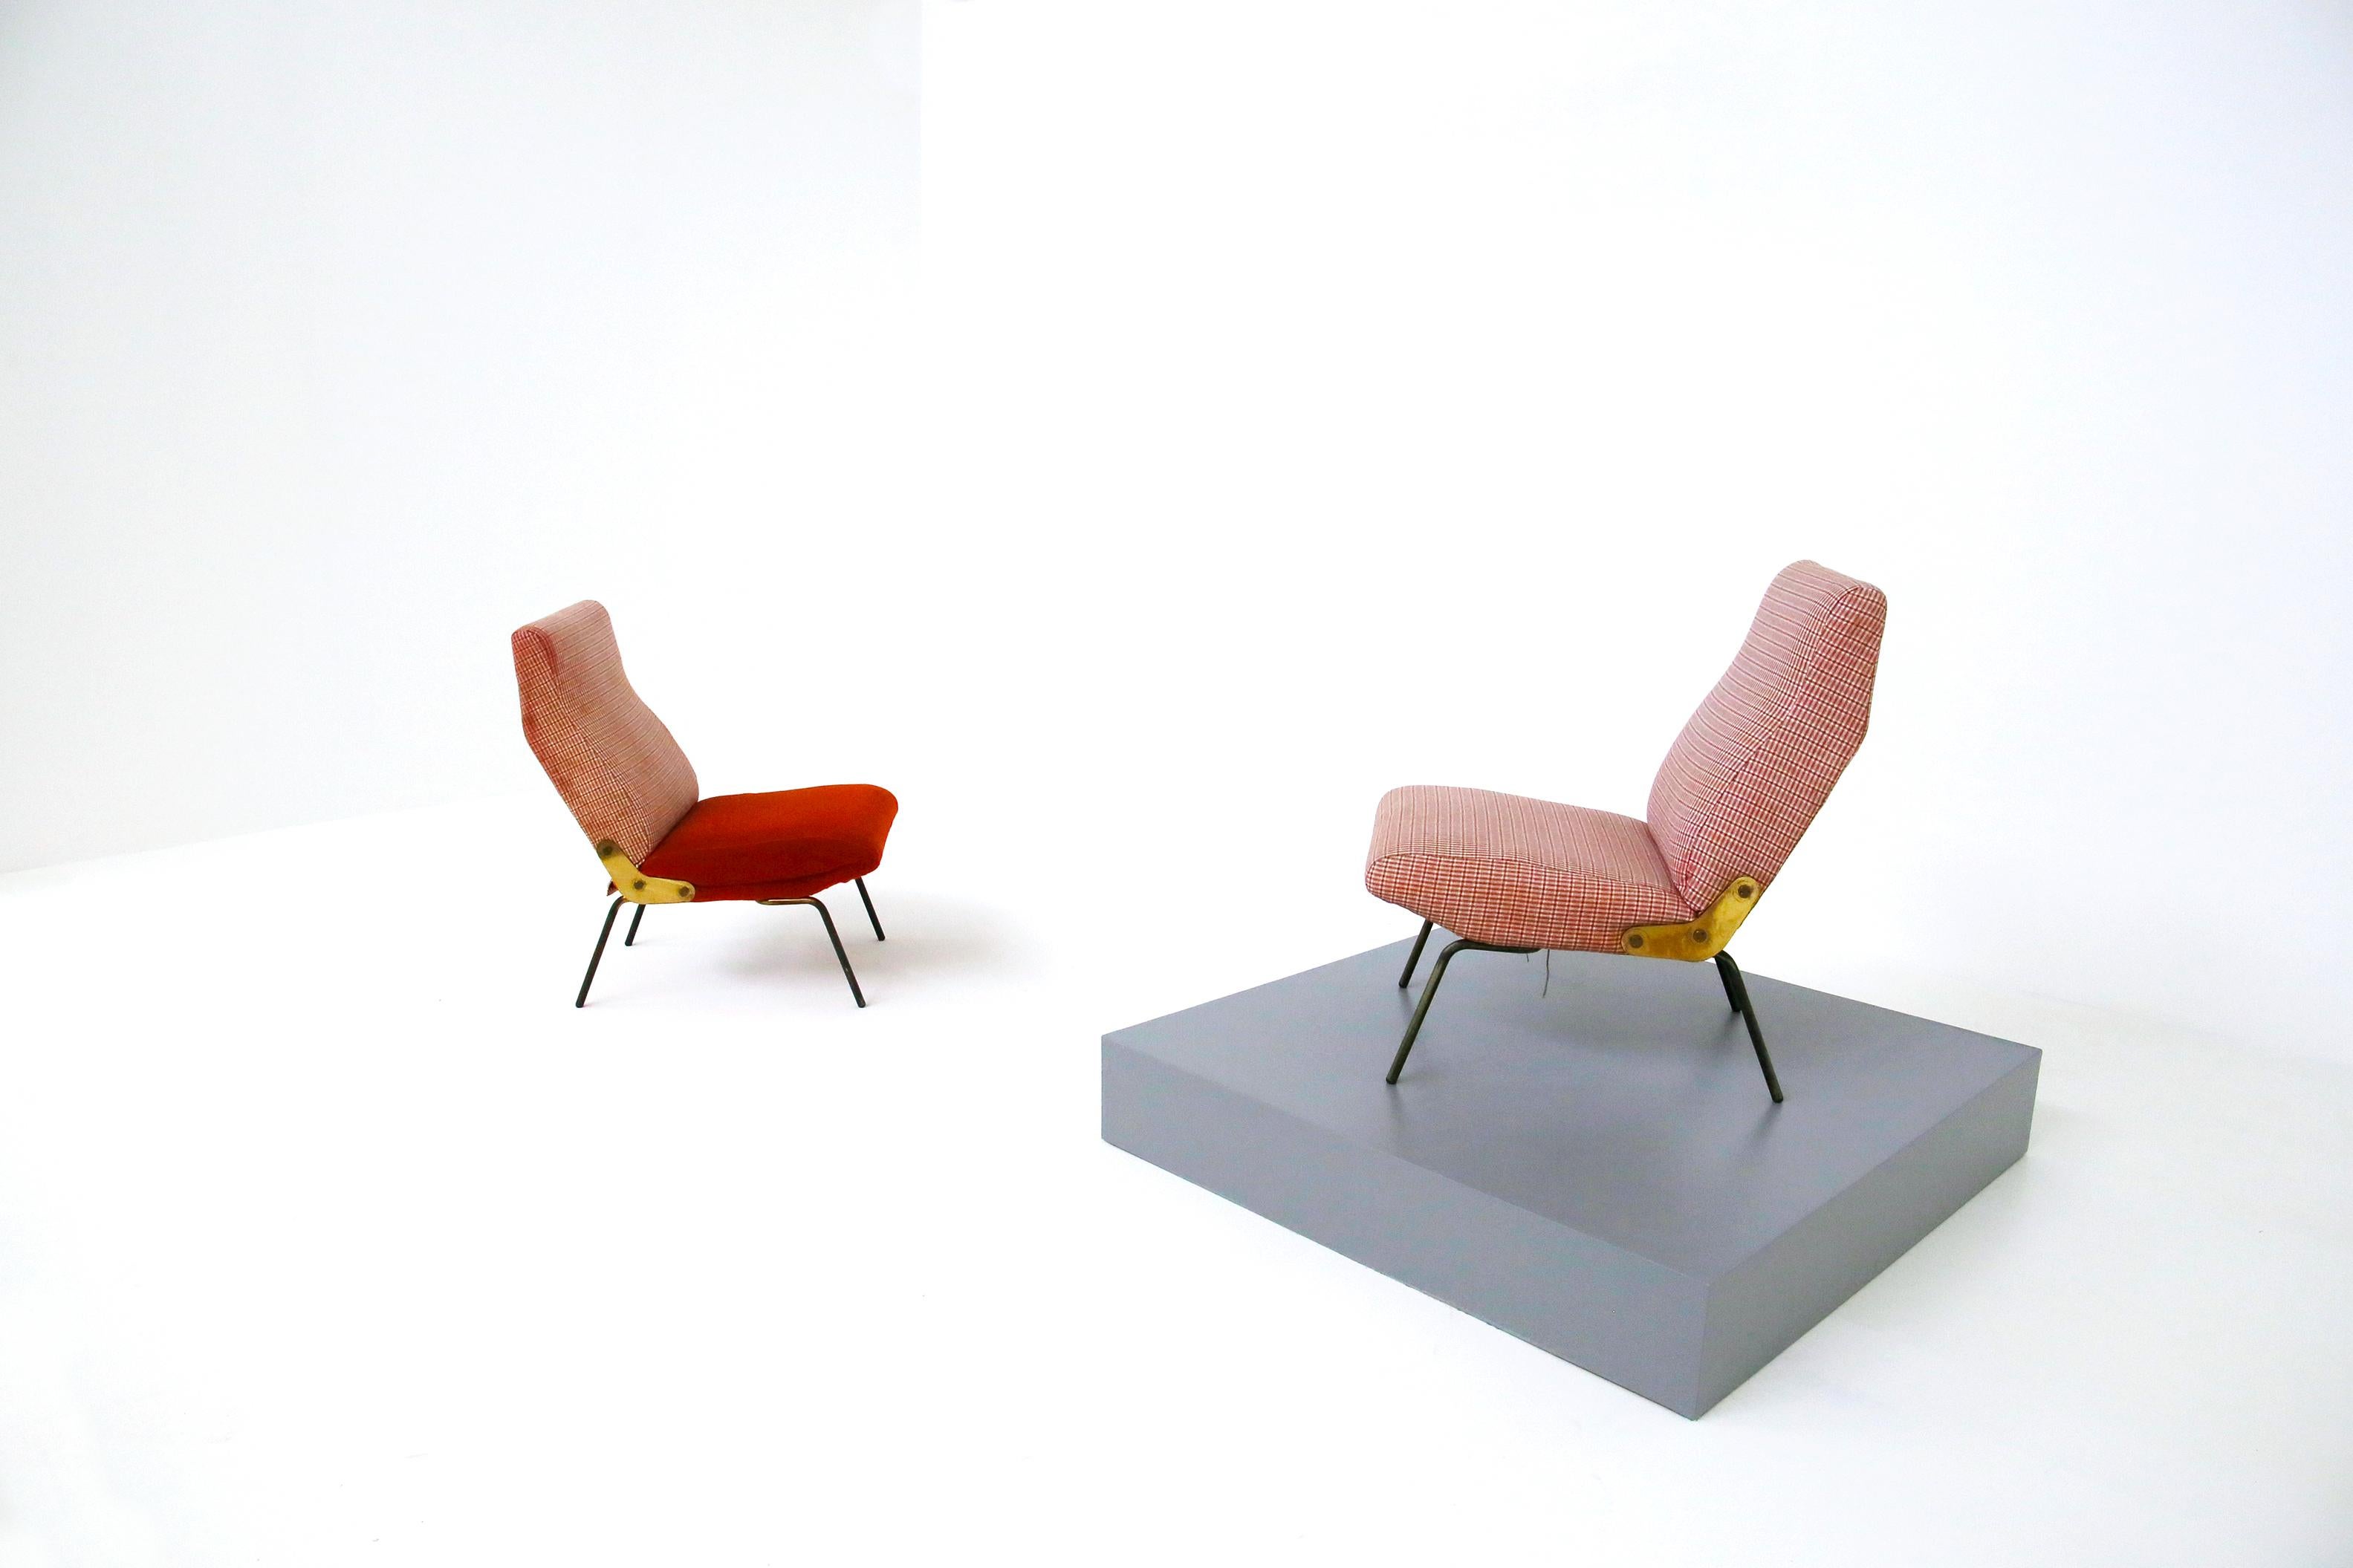 Pair of midcentury armchairs by Erberto Carboni for the Italian manufacture Arflex of 1950.The armchairs are the Delfino model. In particular these armchairs are the model without armrests. The armchairs have the original label under the seat.
The